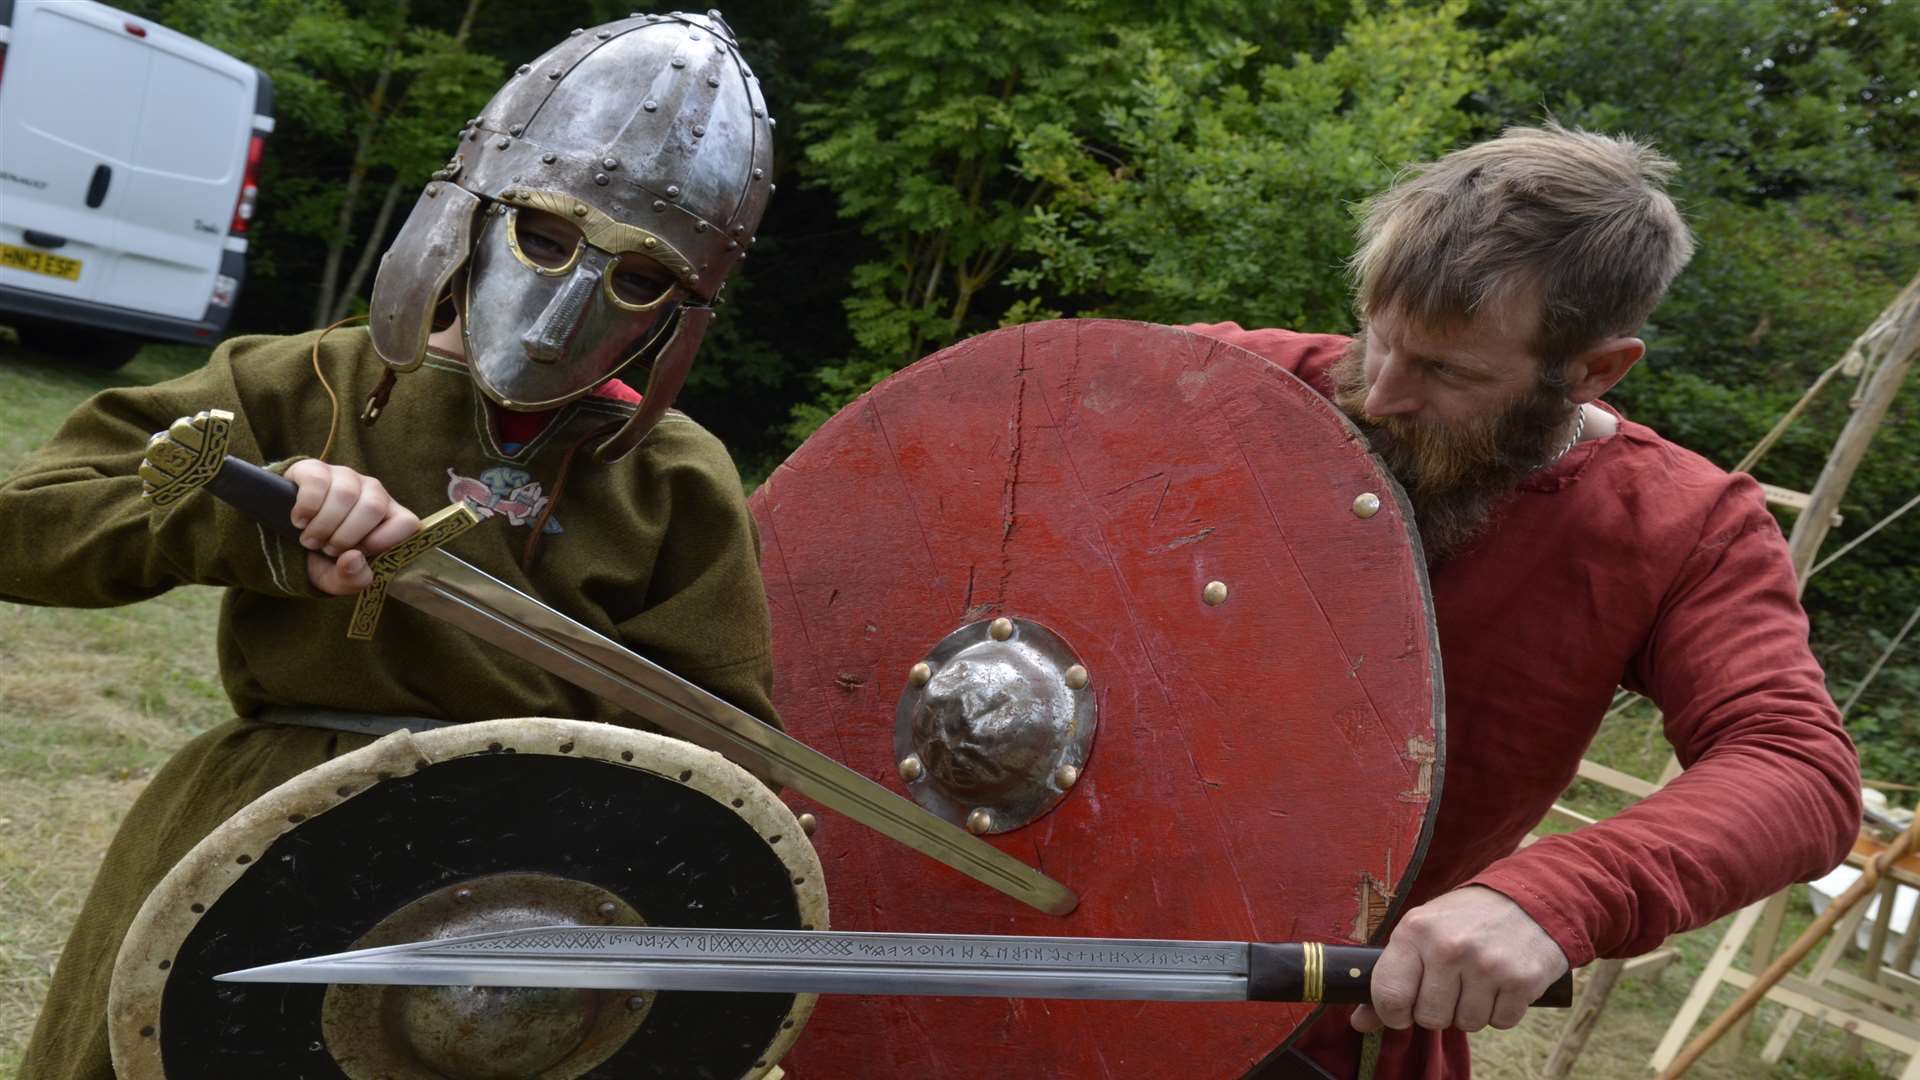 Lewis Geer, eight, of Sittingbourne takes to battle with a Saxon warrior Mark Denyer